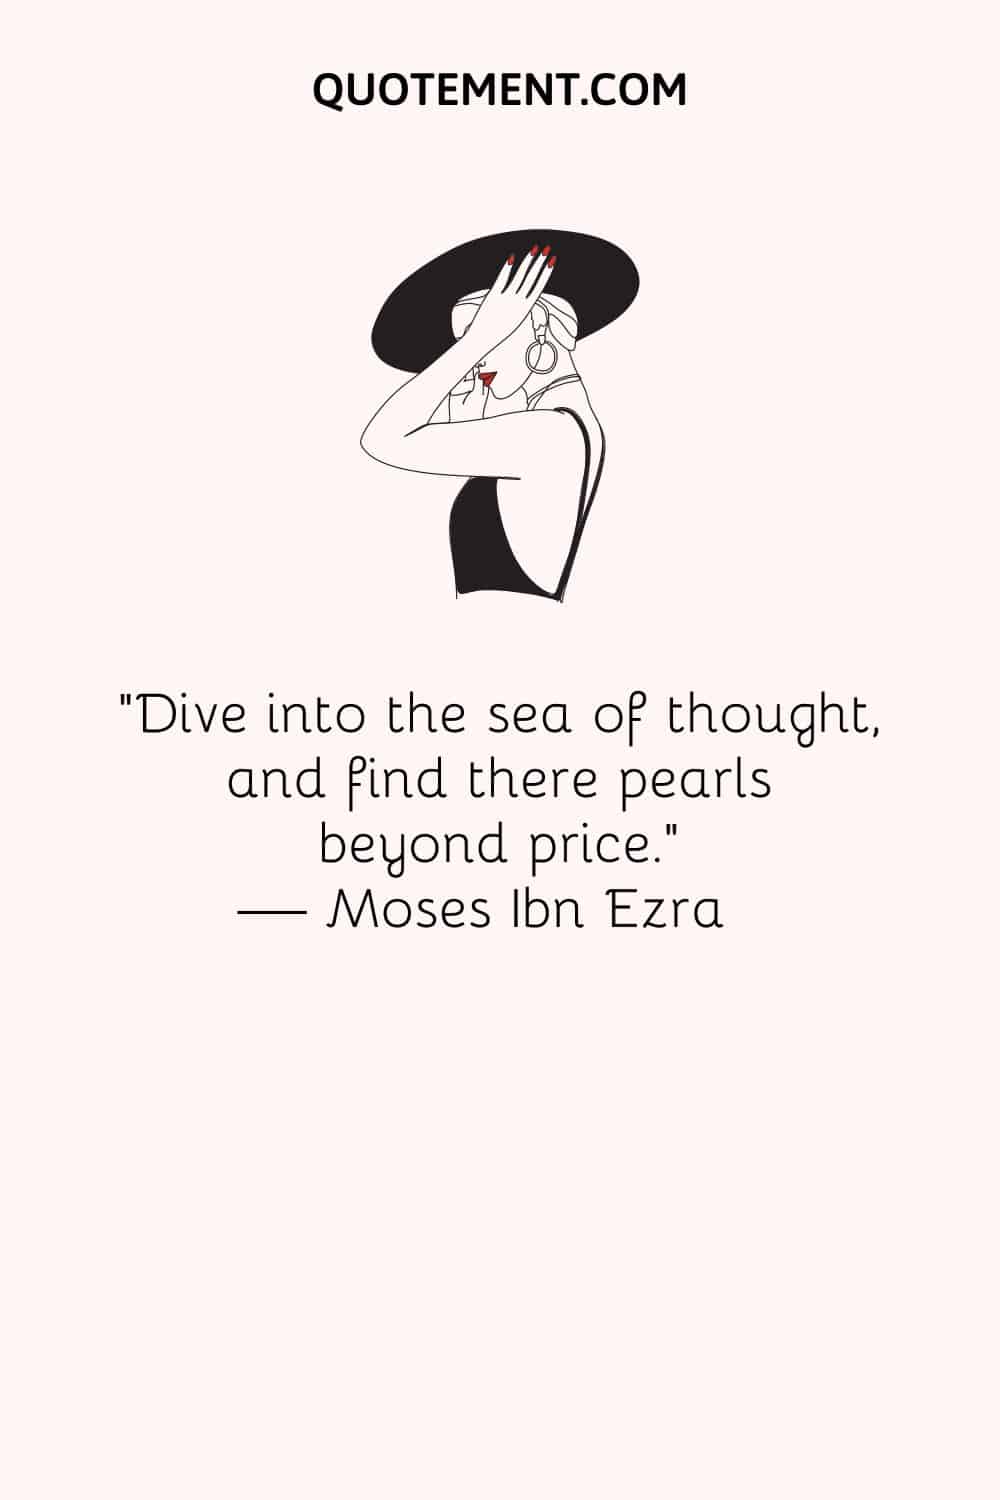 Dive into the sea of thought, and find there pearls beyond price